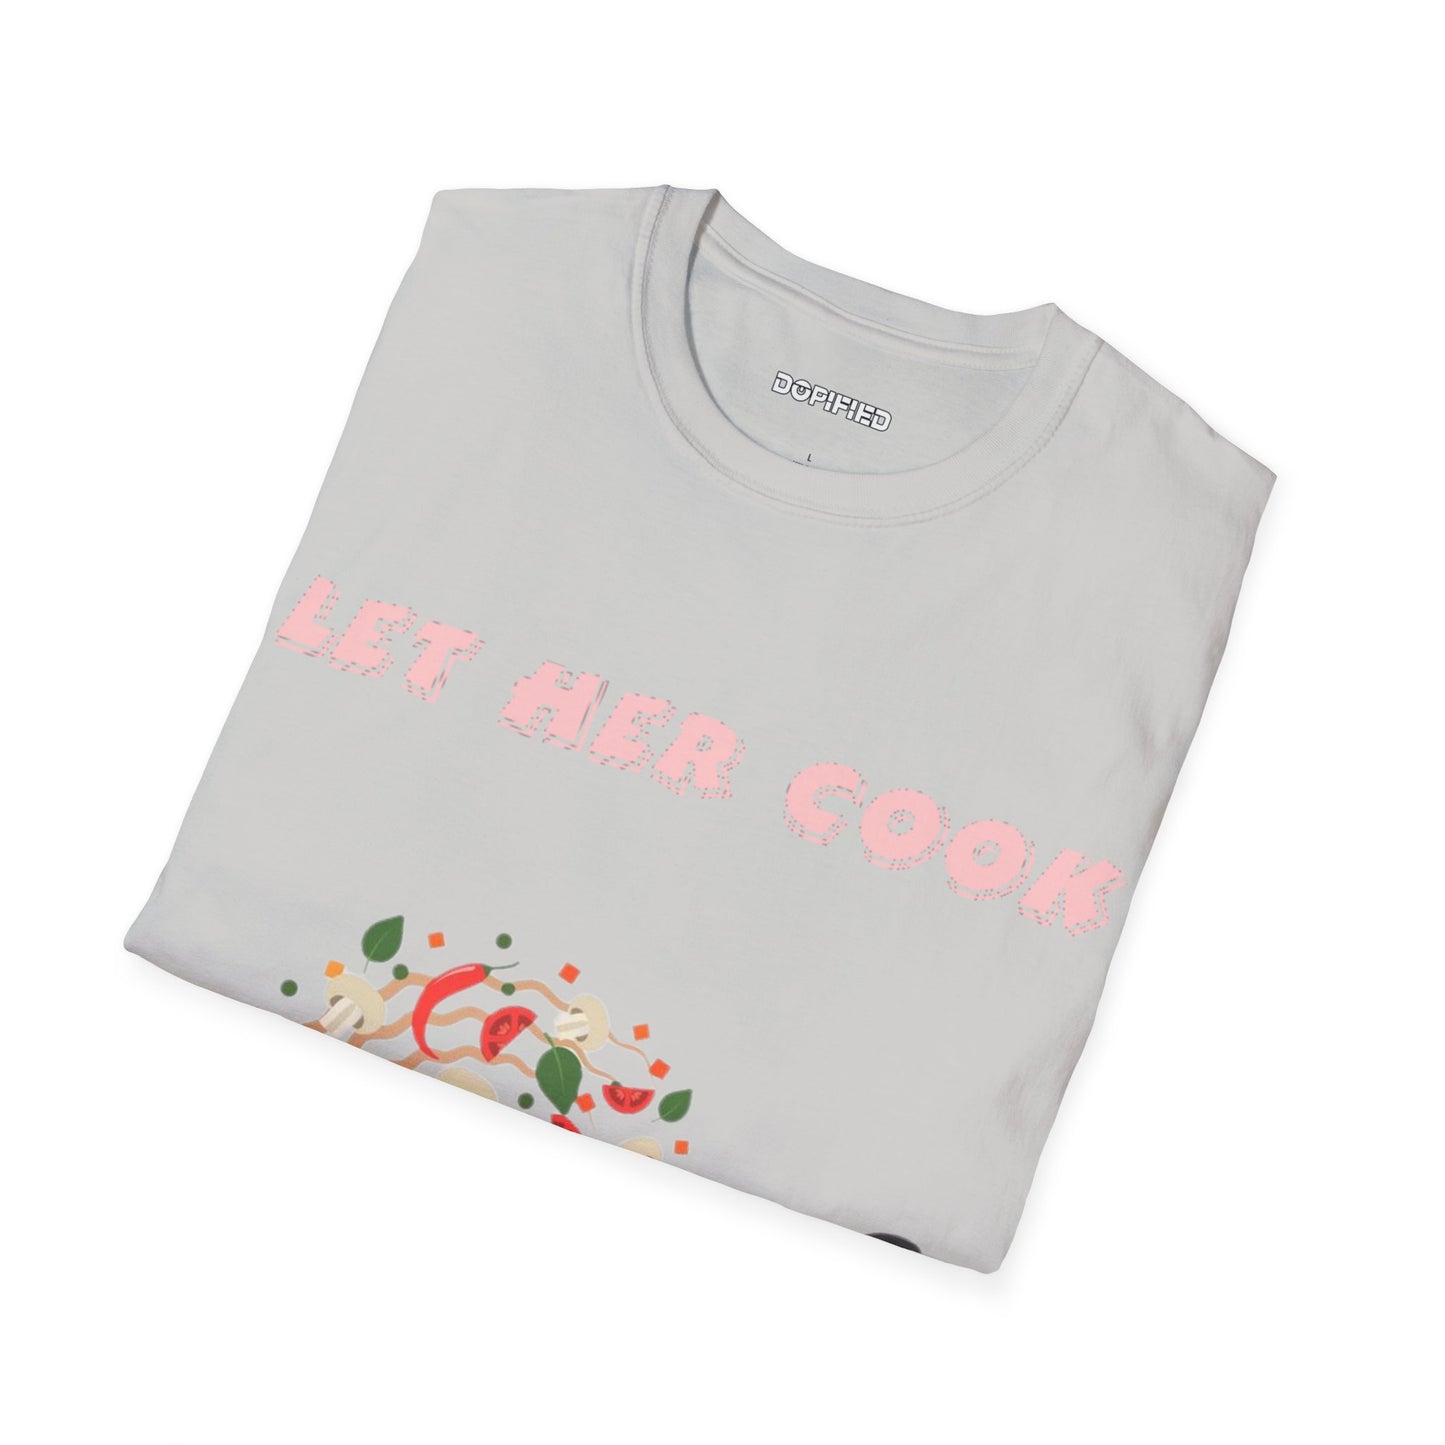 Let Her Cook‼️  Softstyle T-Shirt